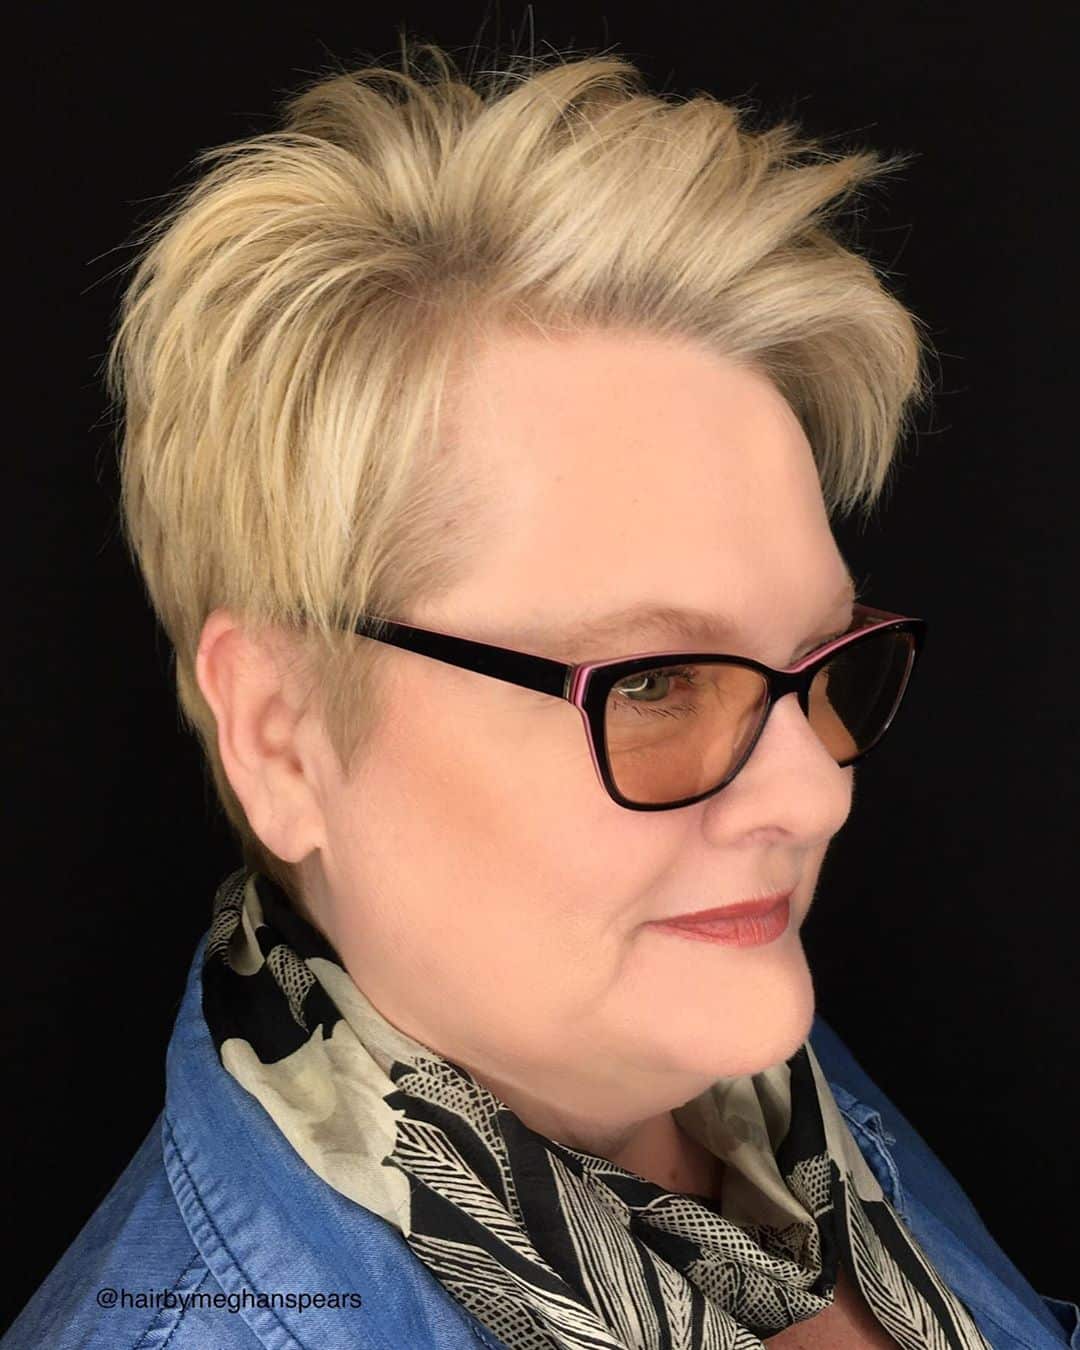 textured pixie haircut for woman over 50 with glasses